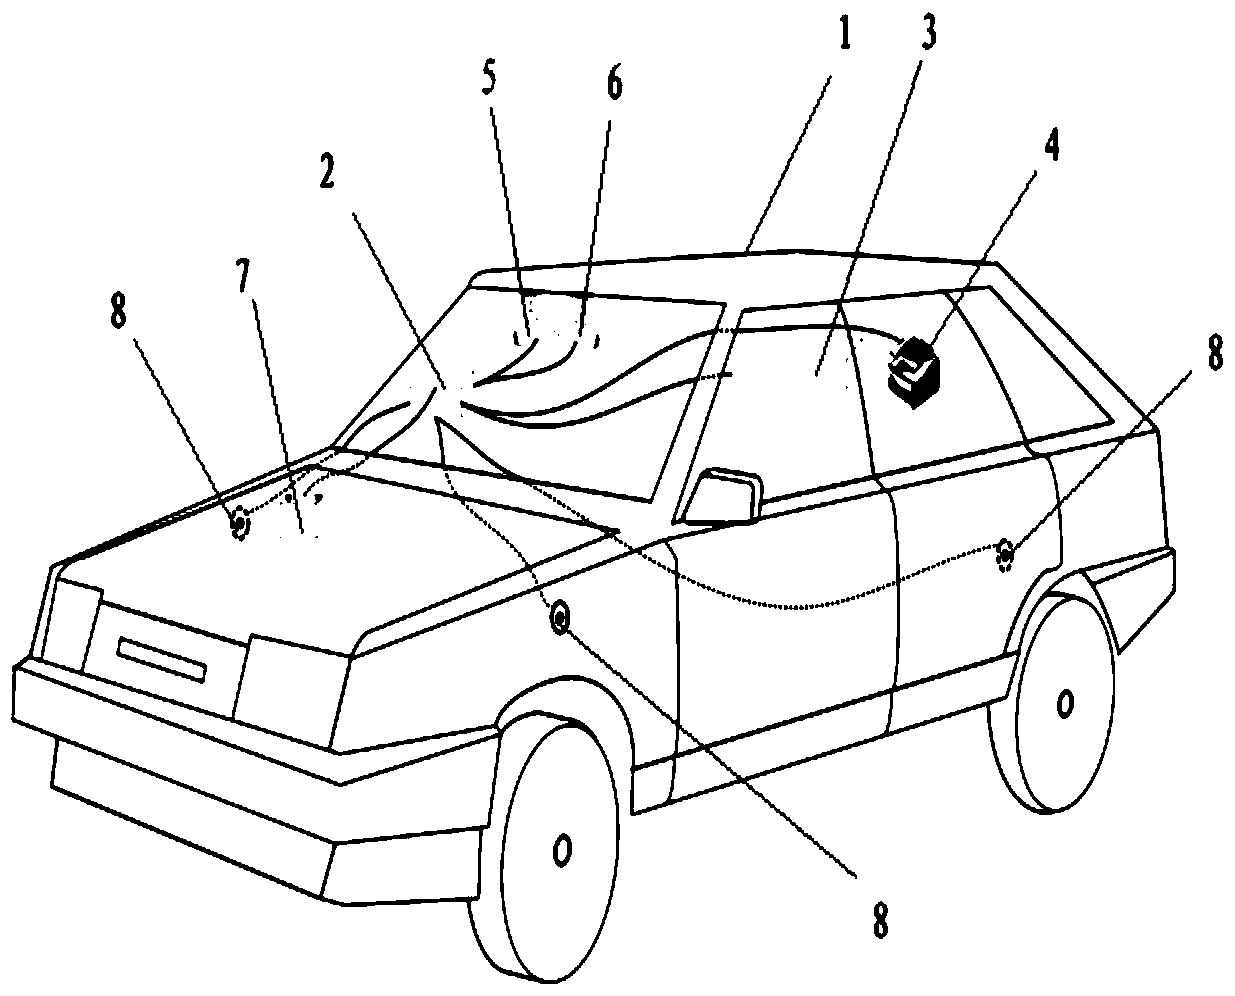 Police vehicle-mounted office system and method